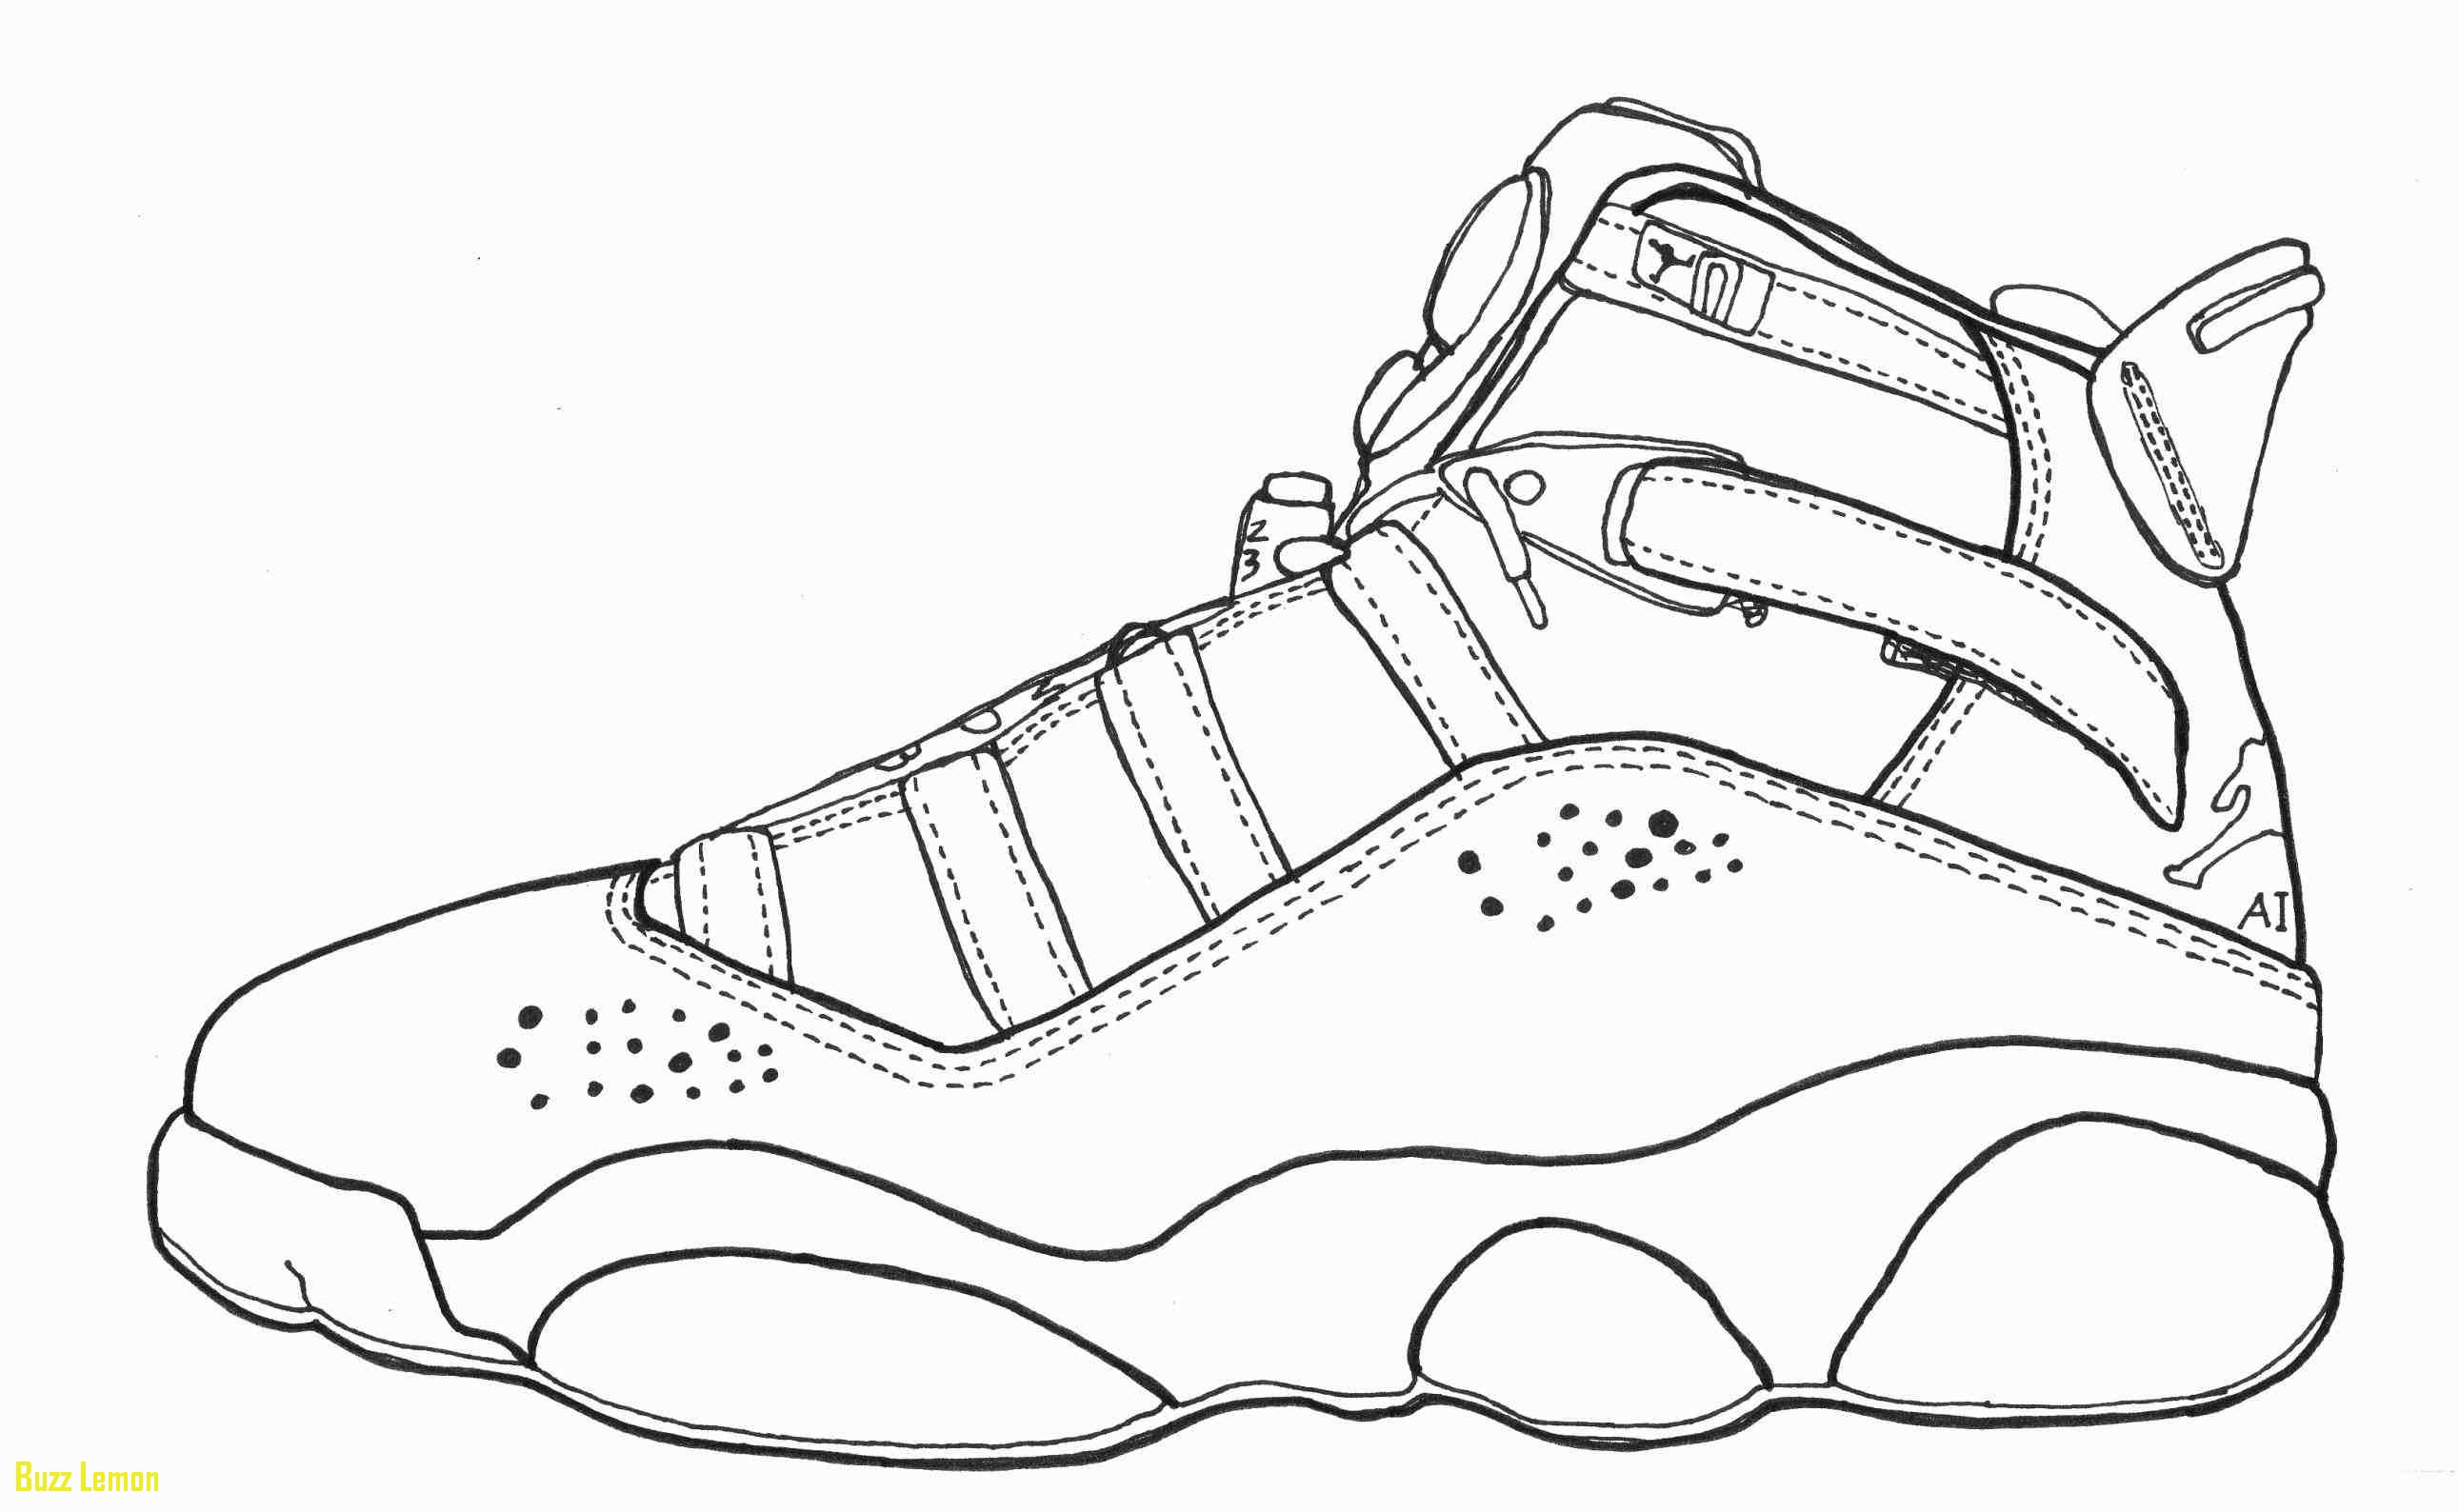 Kd Shoes Coloring Pages at GetColorings.com | Free ...